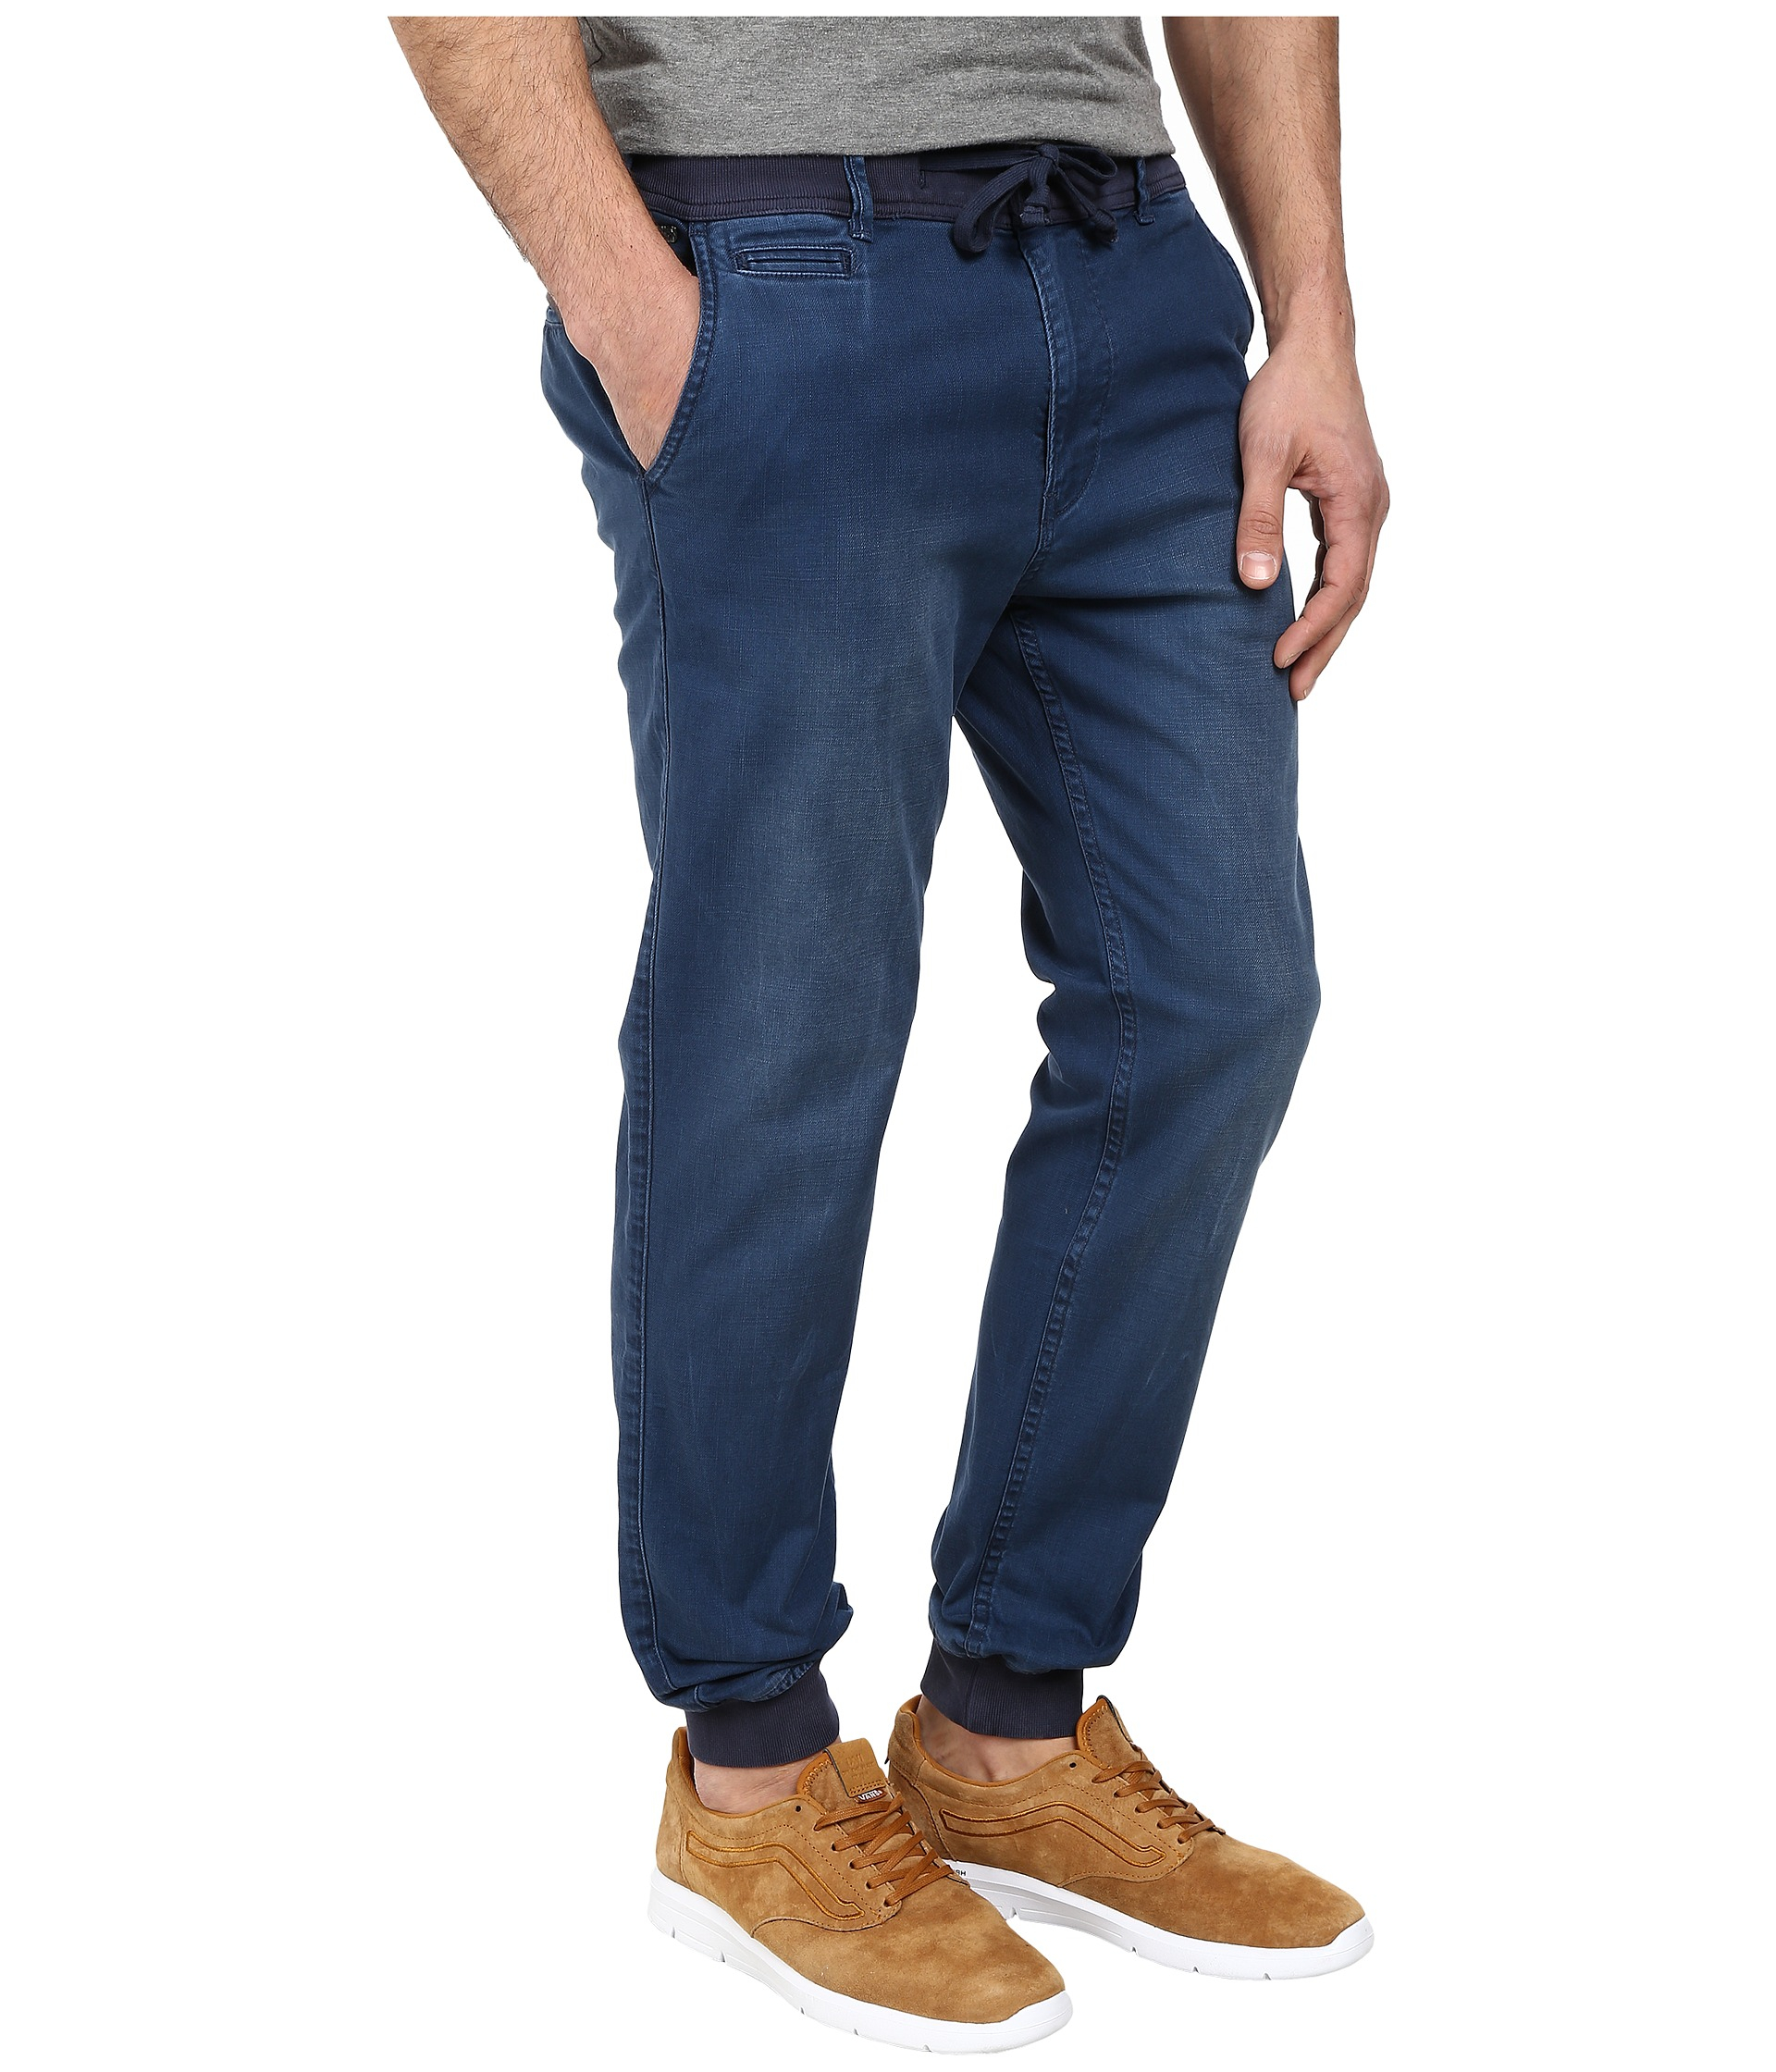 Scotch & Soda Thorne Jogger Pants in Navy (Blue) for Men - Lyst